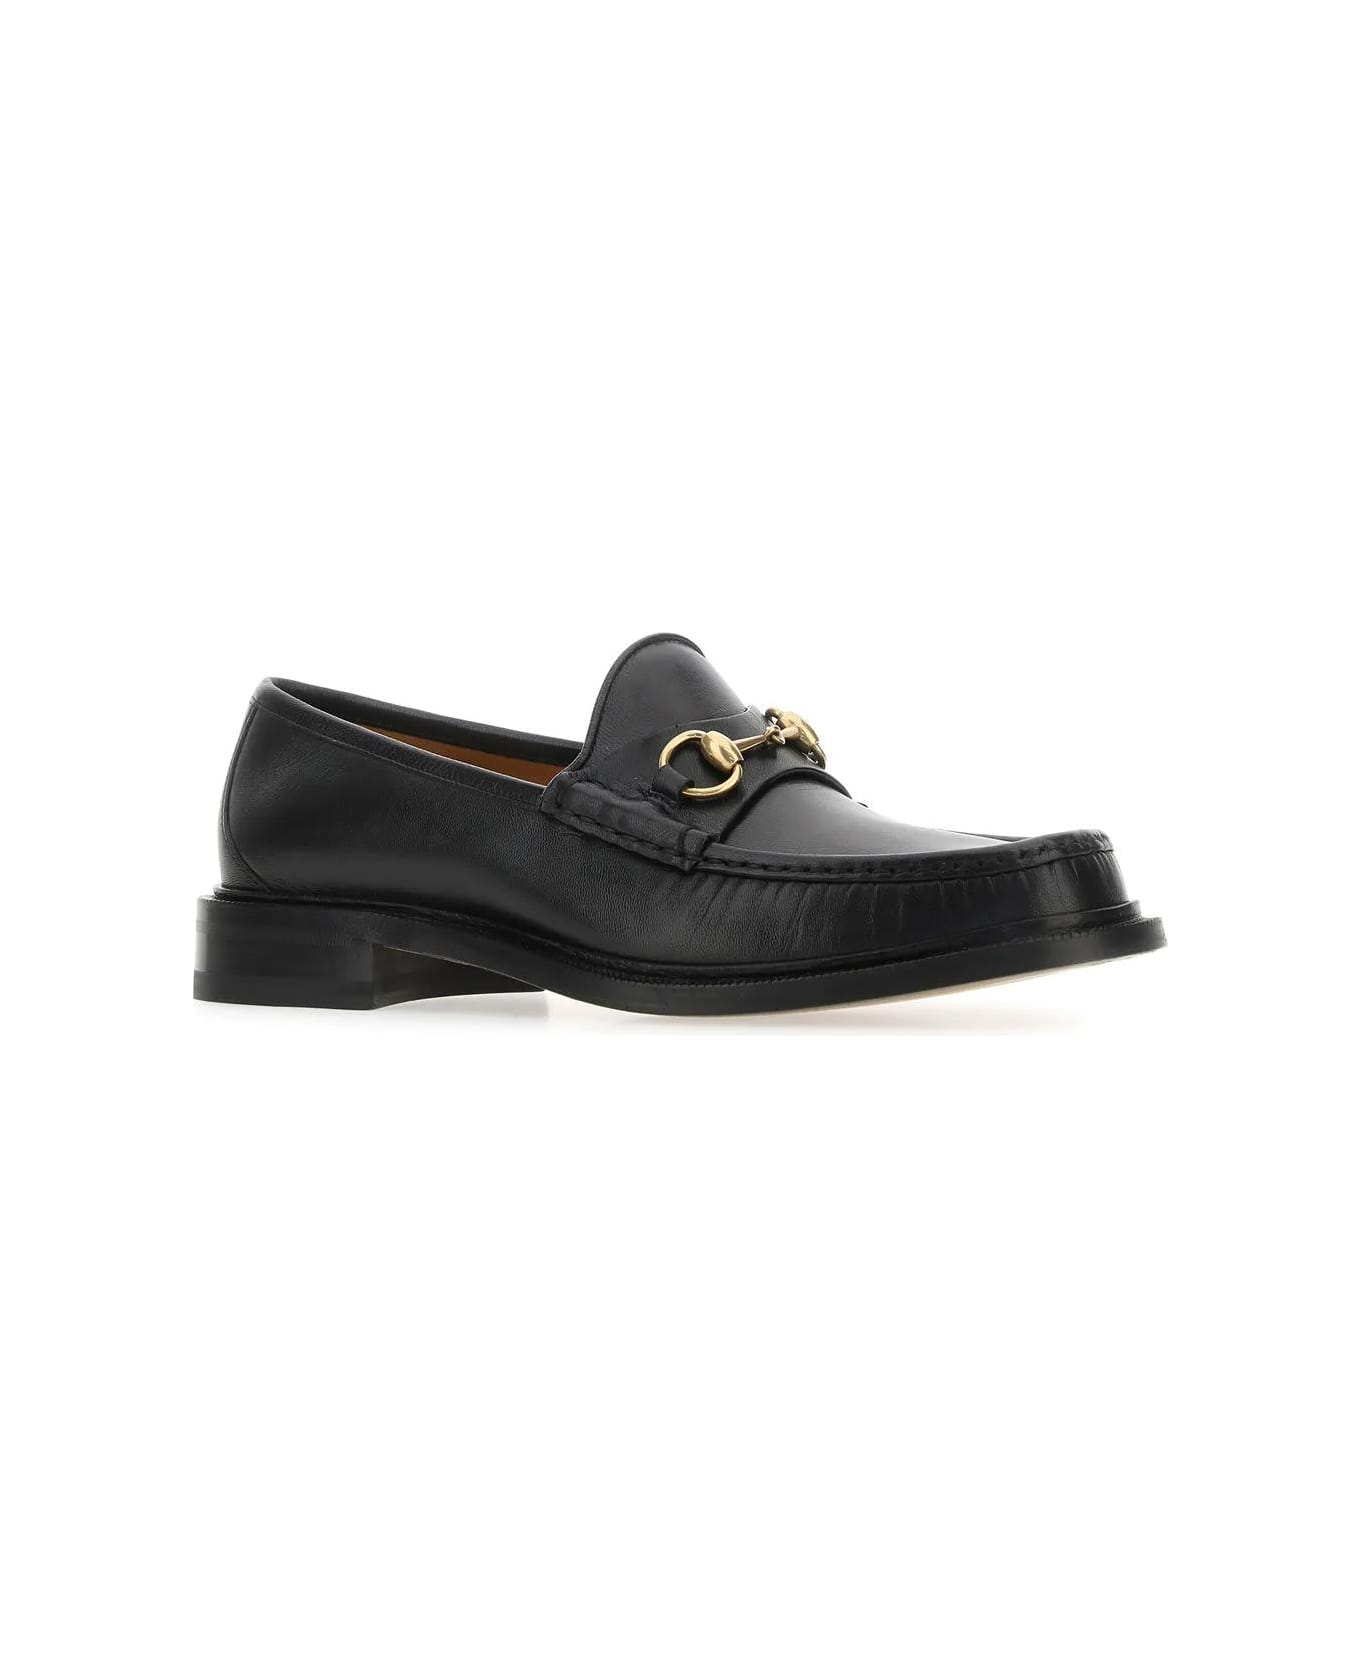 Gucci Black Leather Loafers - Black ローファー＆デッキシューズ